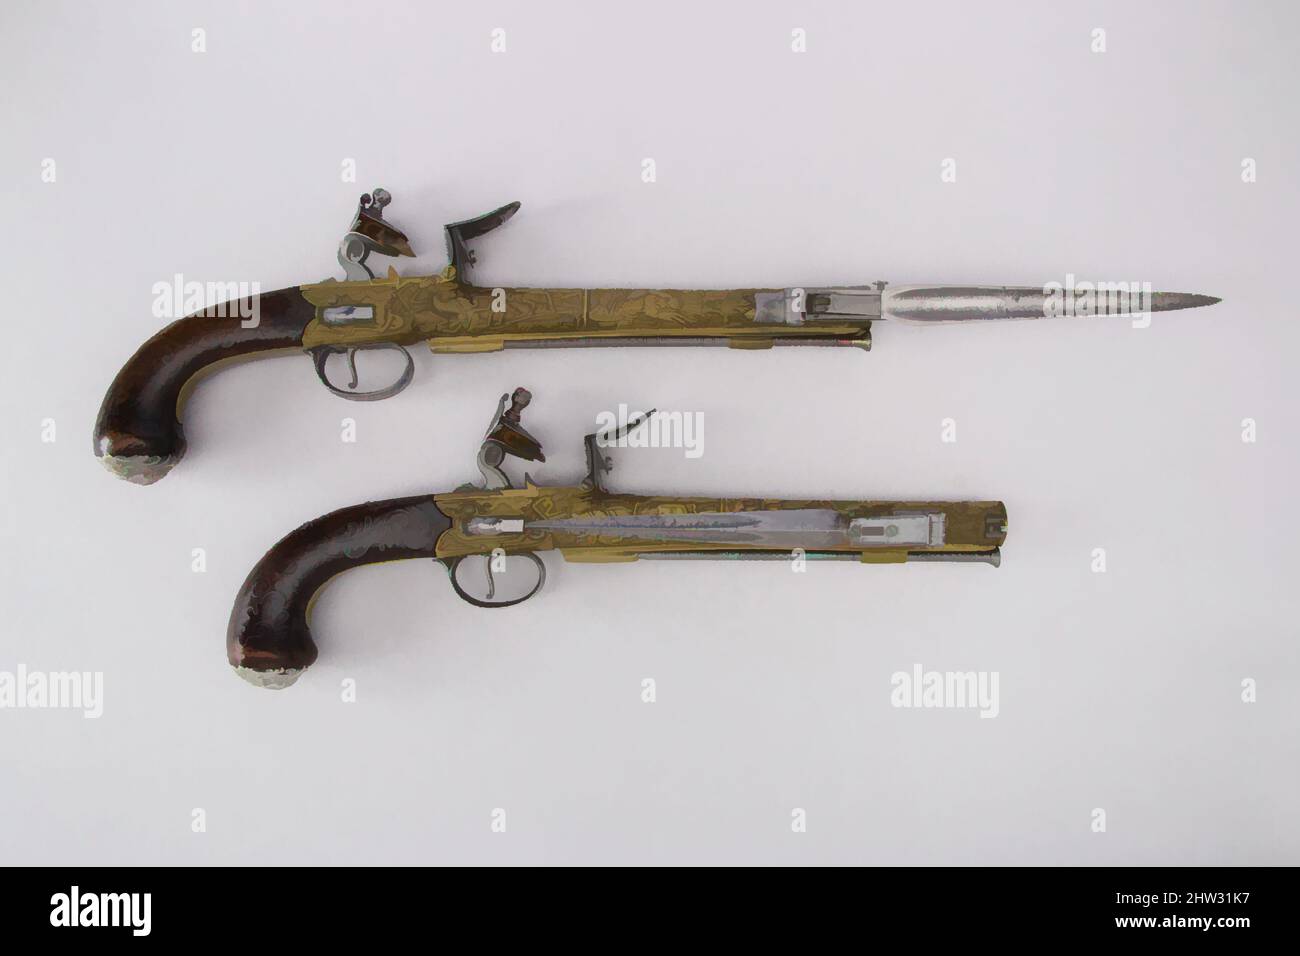 Art inspired by Pair of Flintlock Box-Lock Pistols with Bayonets, ca. 1782, Birmingham; Balearic Islands, British and Spanish, Steel, wood (walnut), silver, brass, L. 15 1/6 in. (38.3 cm); L. of barrel 8 15/16 in. (22.7 cm); Cal. .64 in. (17 mm); Wt. 2 lb. 5 oz. (1048.9 g);L. 14 15/16, Classic works modernized by Artotop with a splash of modernity. Shapes, color and value, eye-catching visual impact on art. Emotions through freedom of artworks in a contemporary way. A timeless message pursuing a wildly creative new direction. Artists turning to the digital medium and creating the Artotop NFT Stock Photo